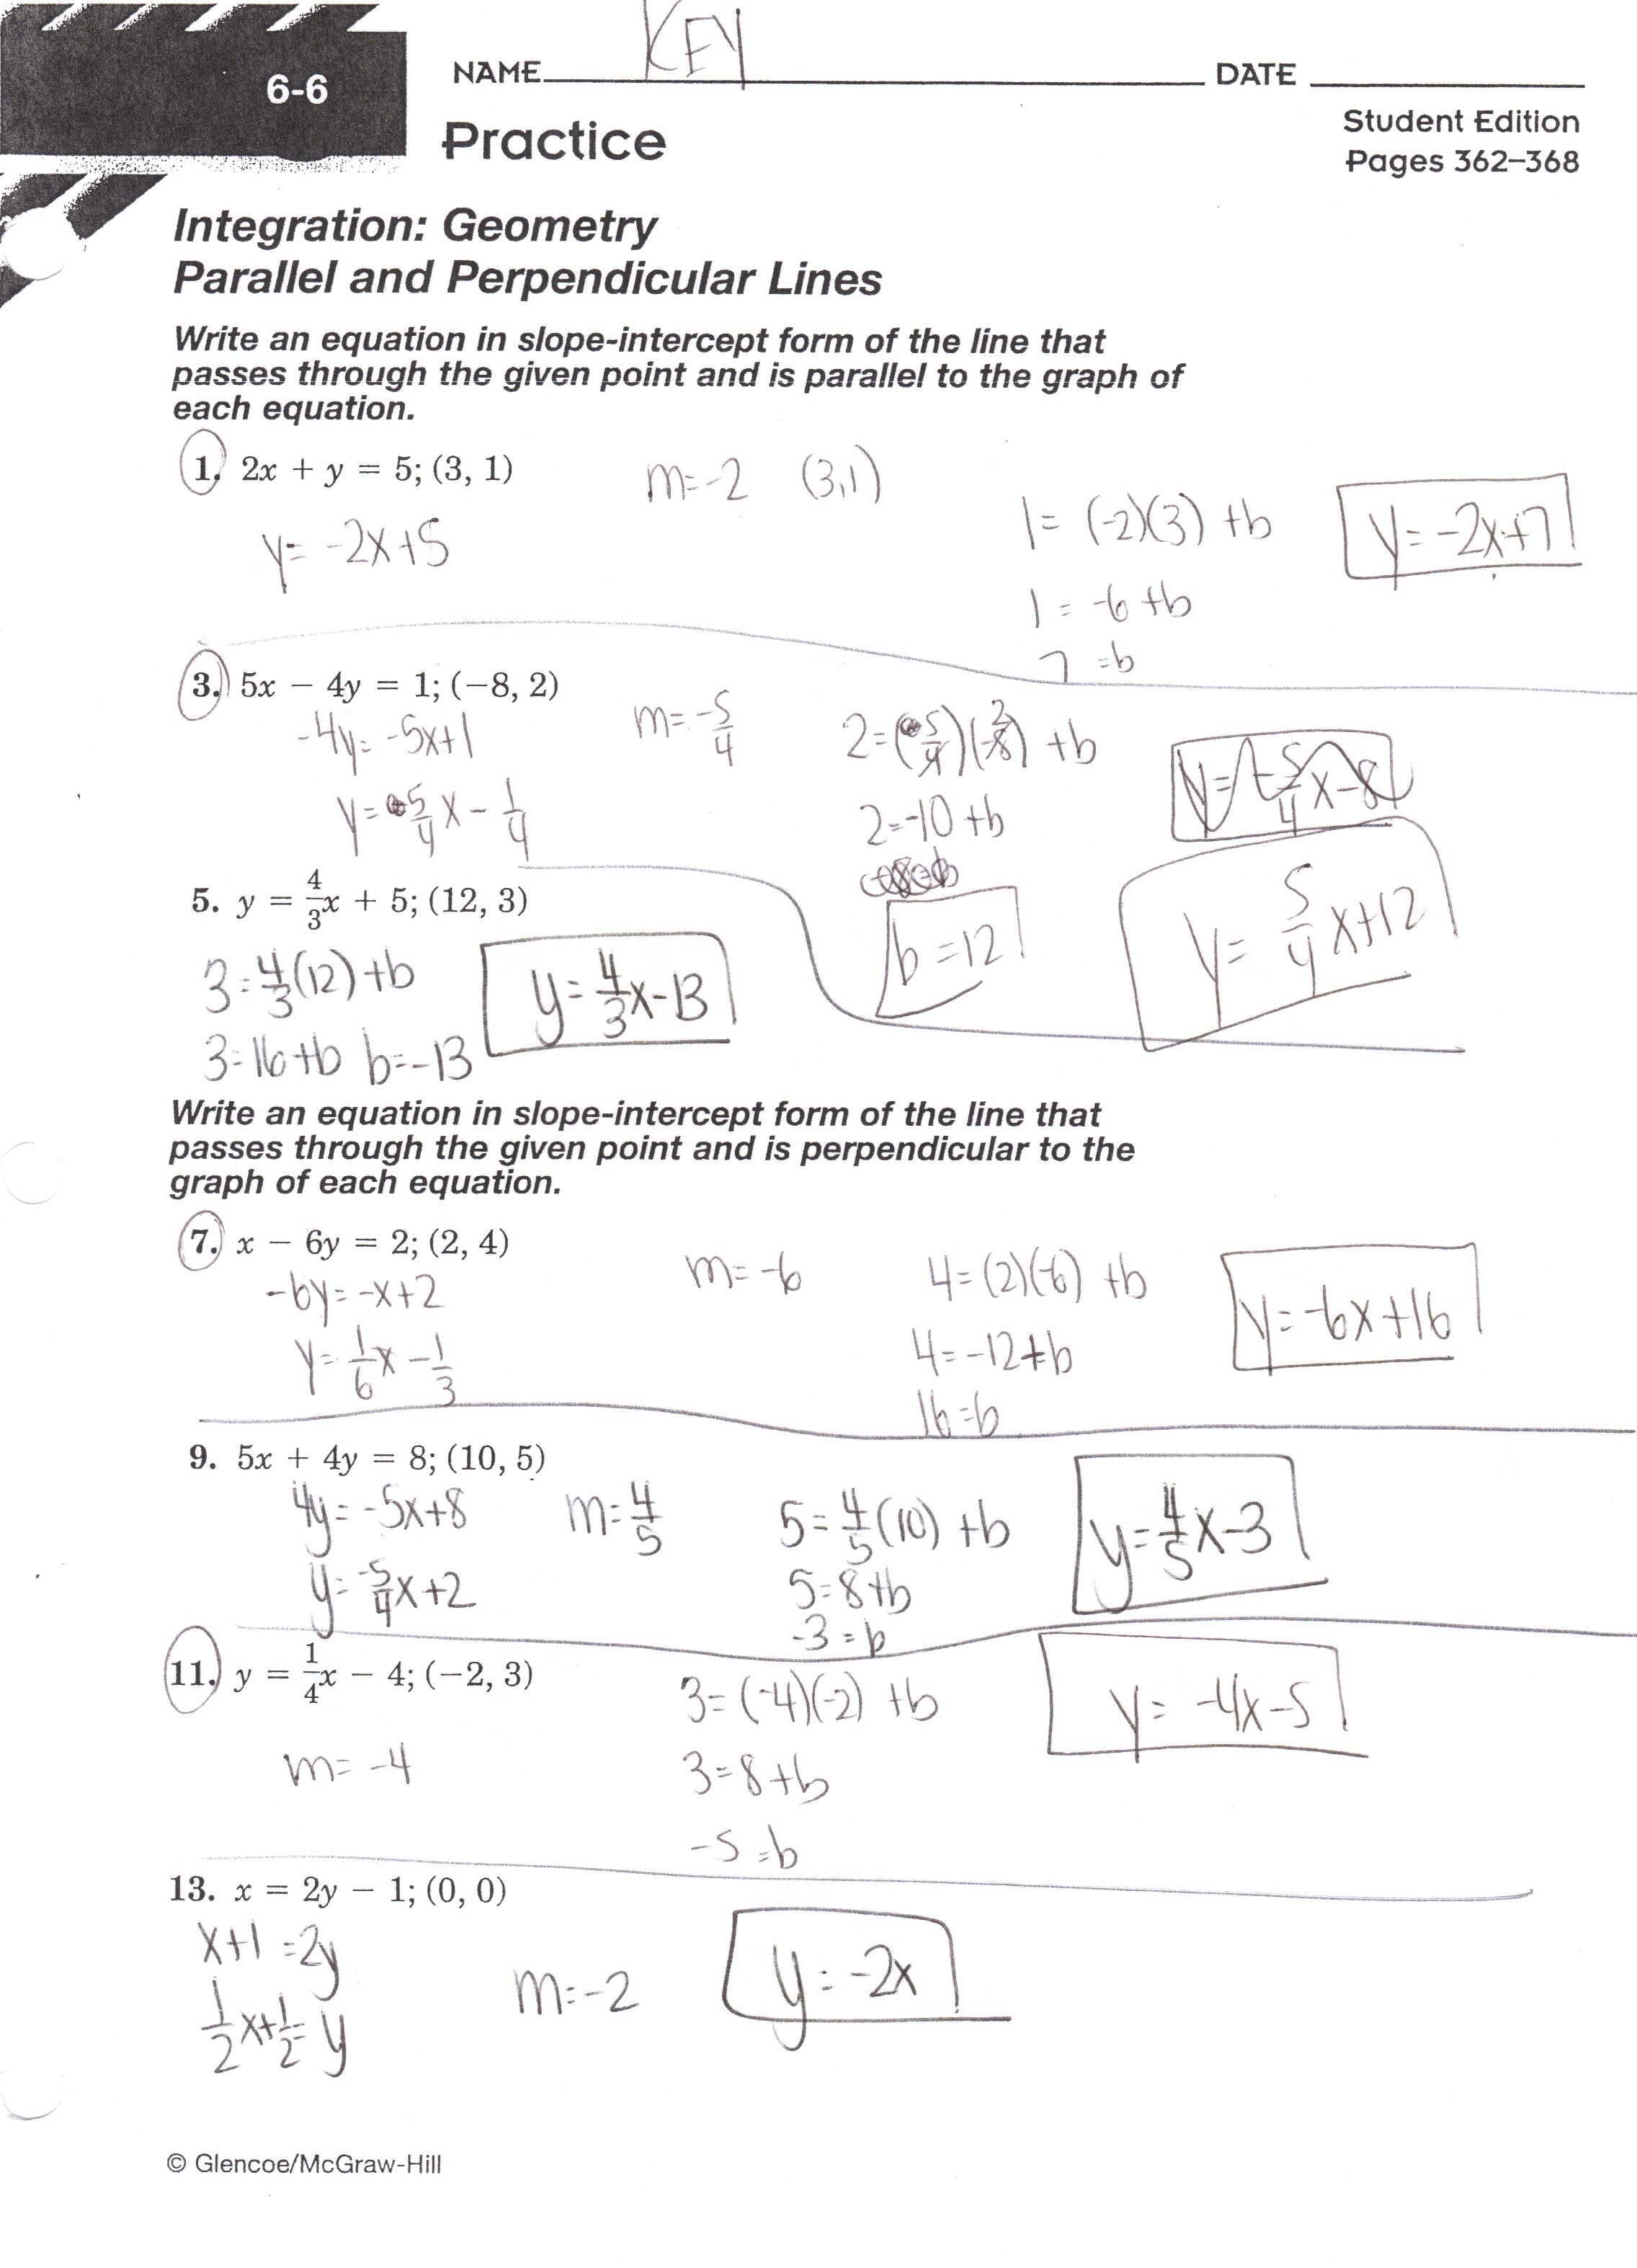 Parallel And Perpendicular Lines Worksheet Answers  Yooob Or Geometry Parallel And Perpendicular Lines Worksheet Answers